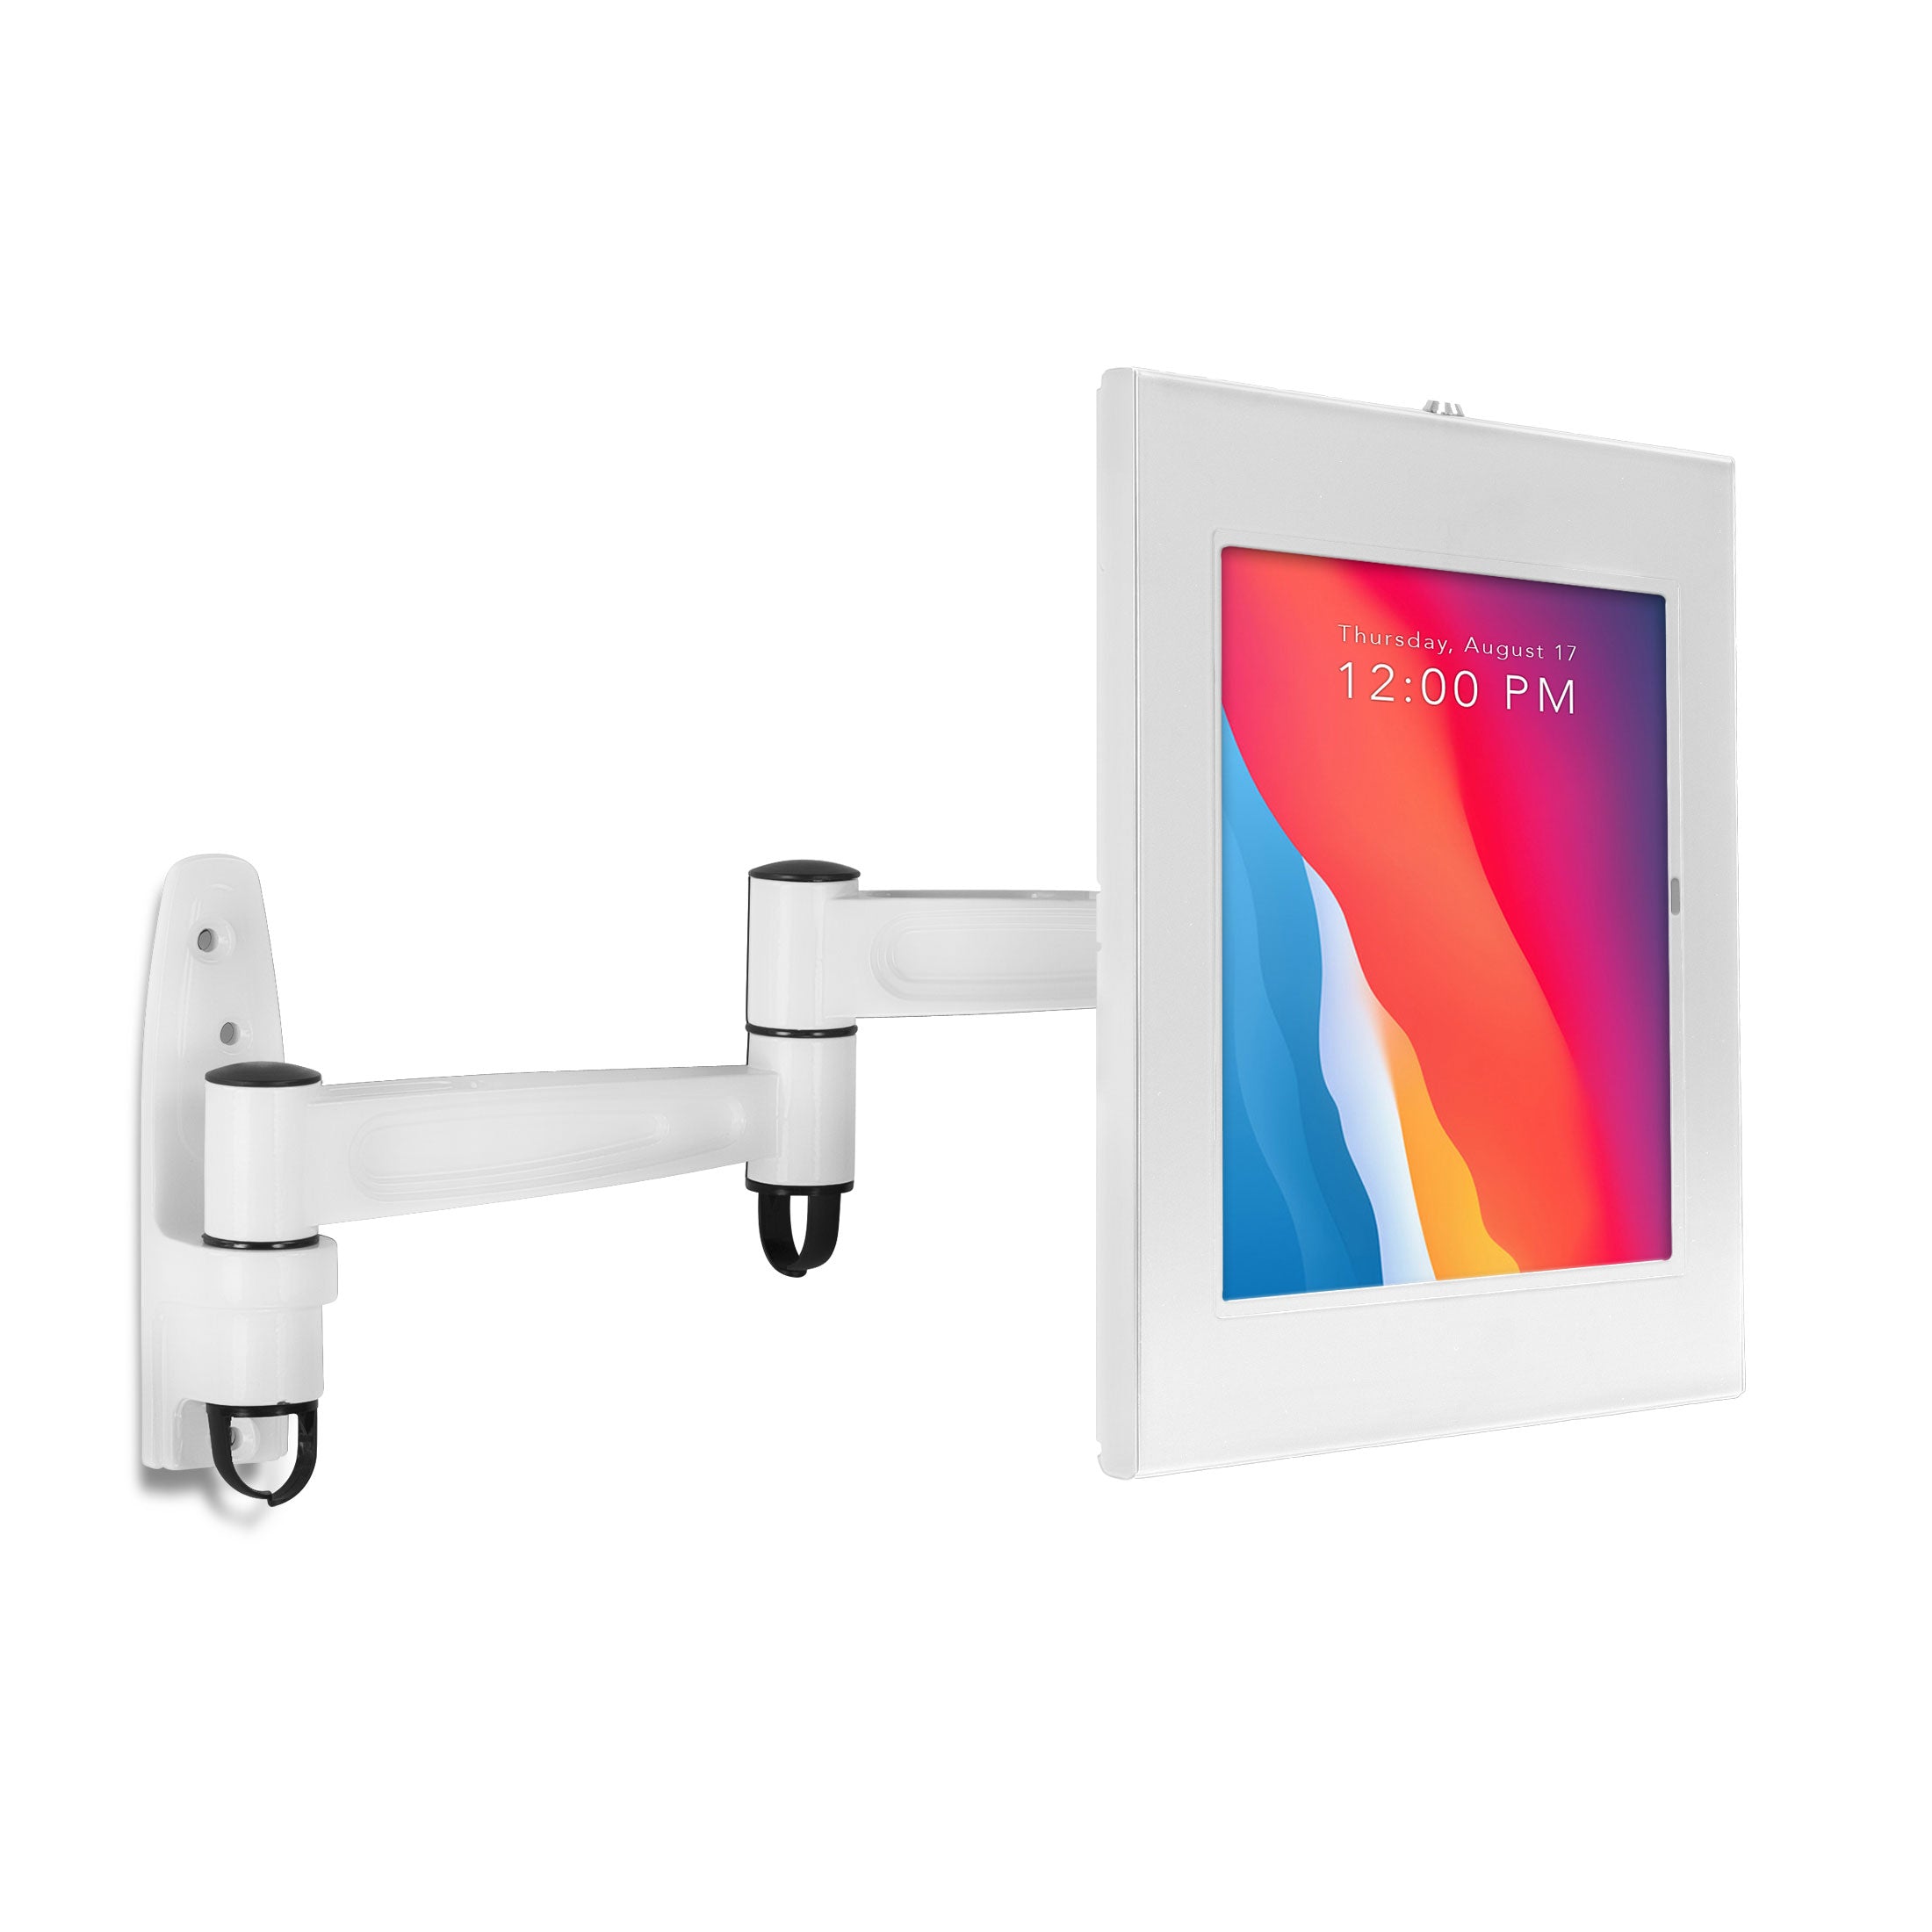 Anti-Theft Tablet Wall Mount with Swing Arm for iPad, iPad Air, iPad Pro